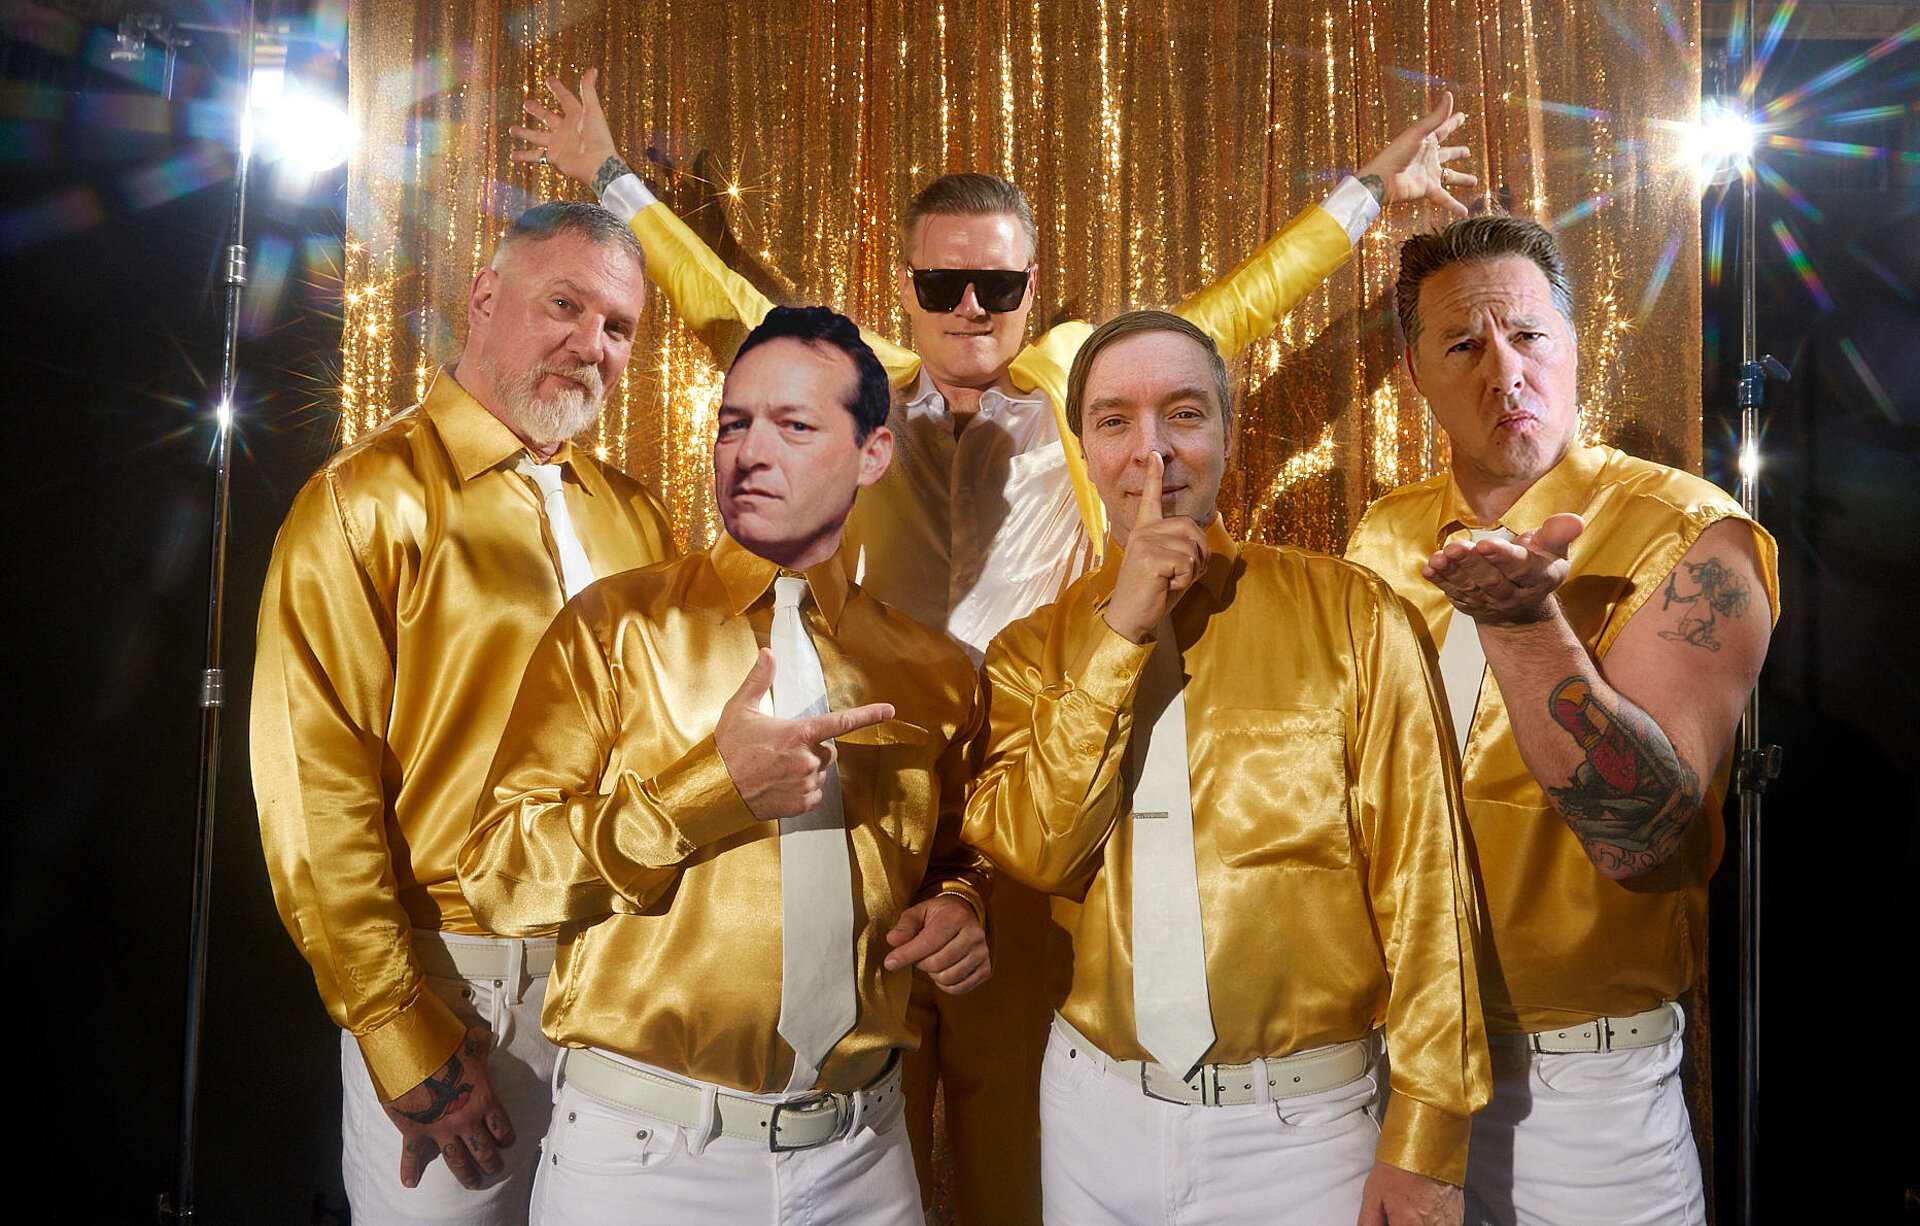 ME FIRST AND THE GIMME GIMMES